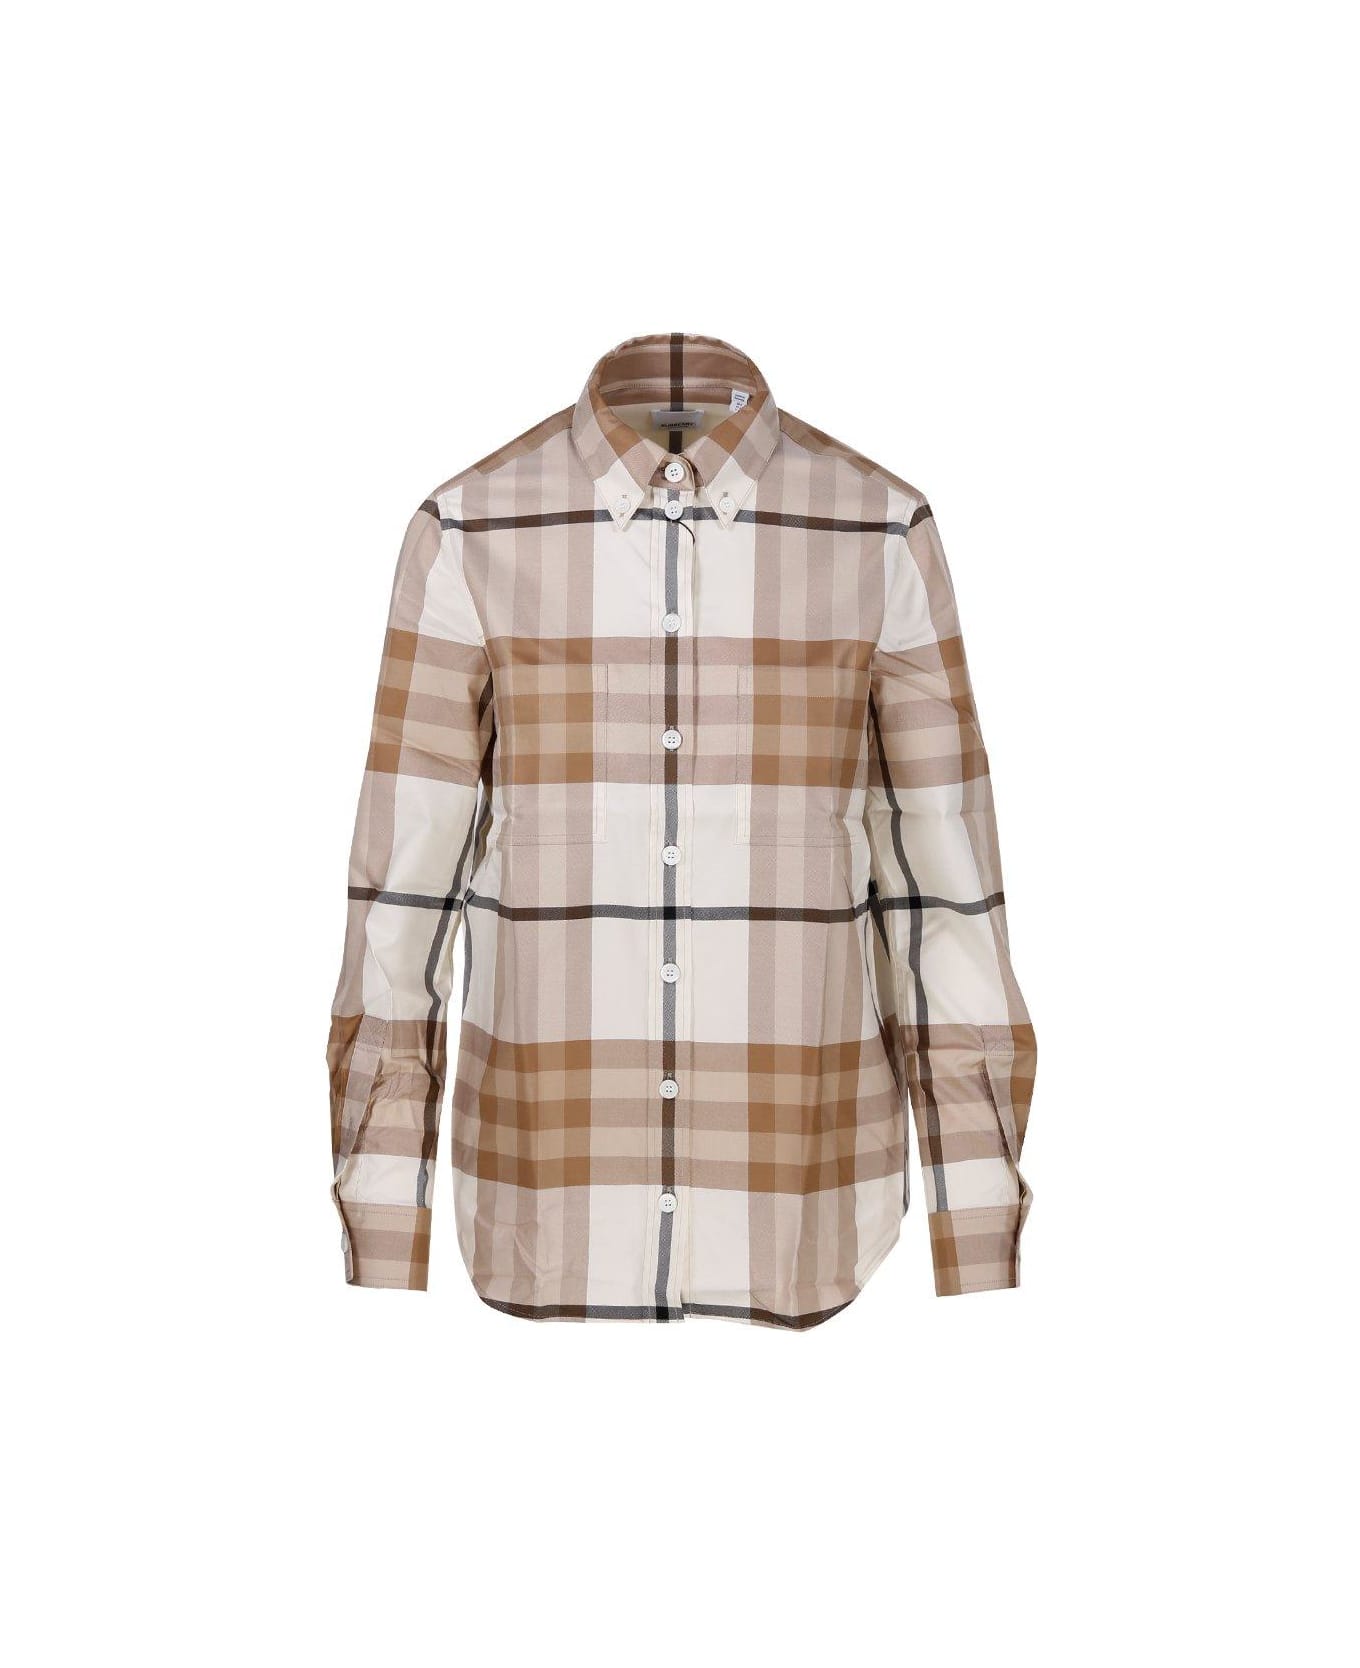 Burberry Checked Long-sleeved Shirt - Bianco e Beige シャツ